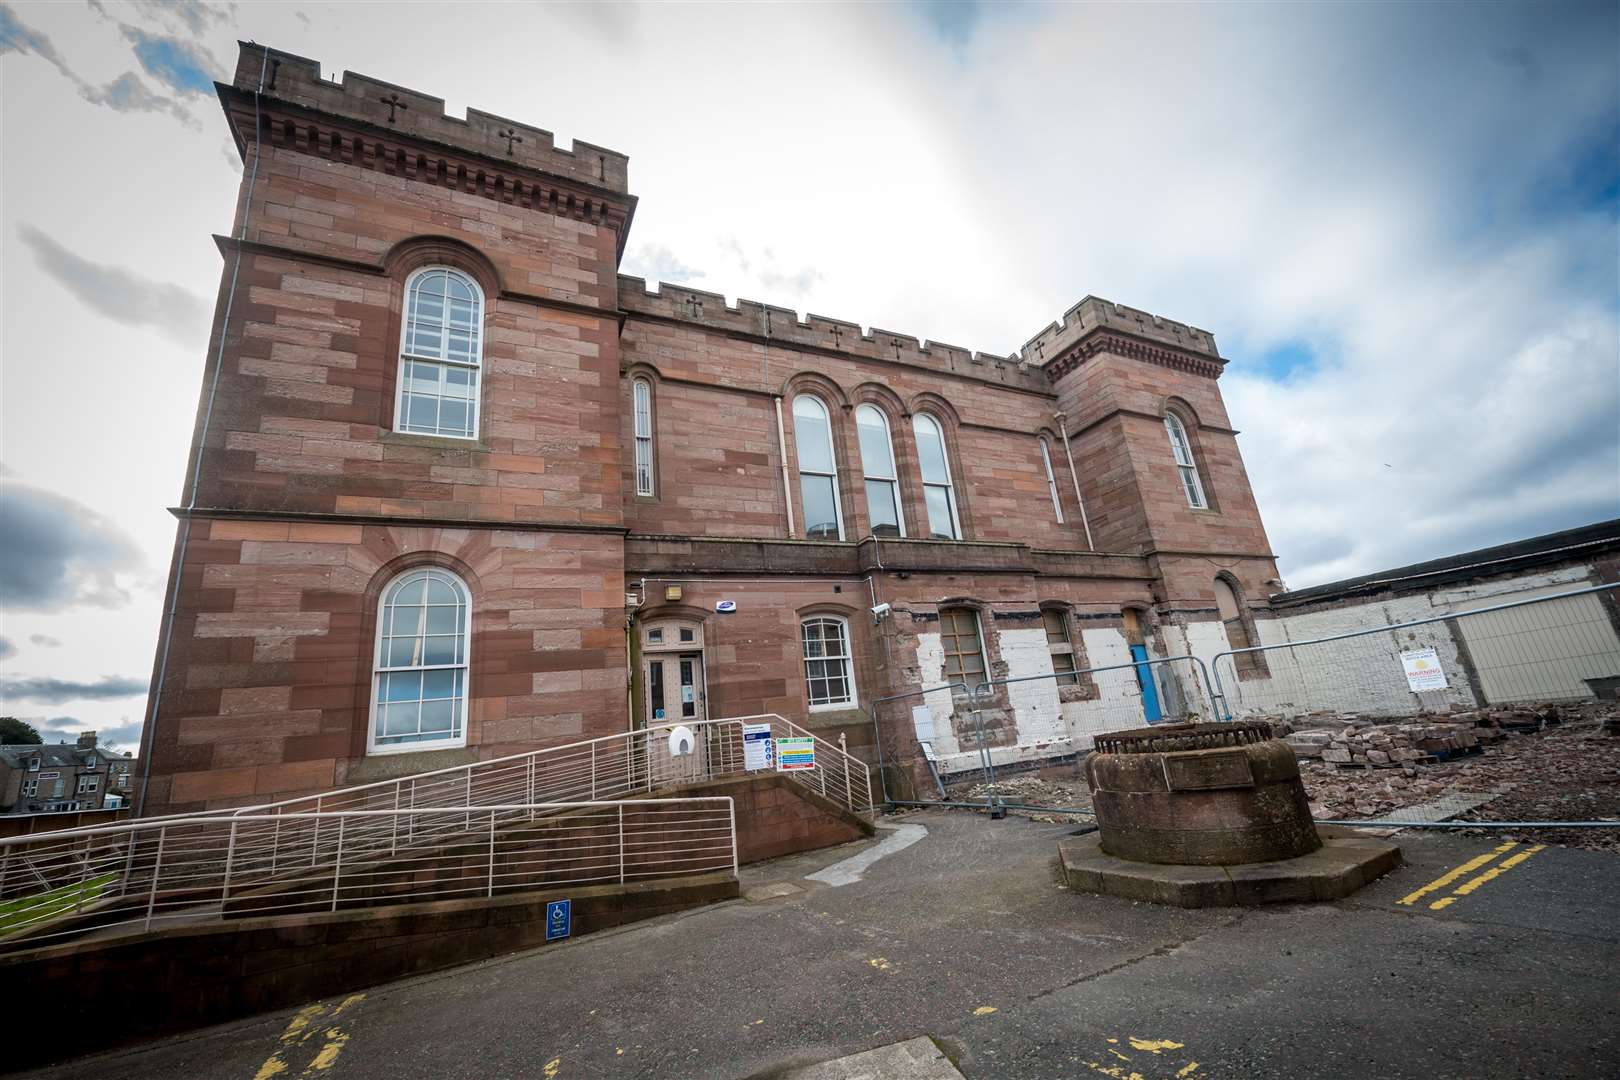 Inverness Castle is to be made into a gateway tourist attraction for the Highlands.